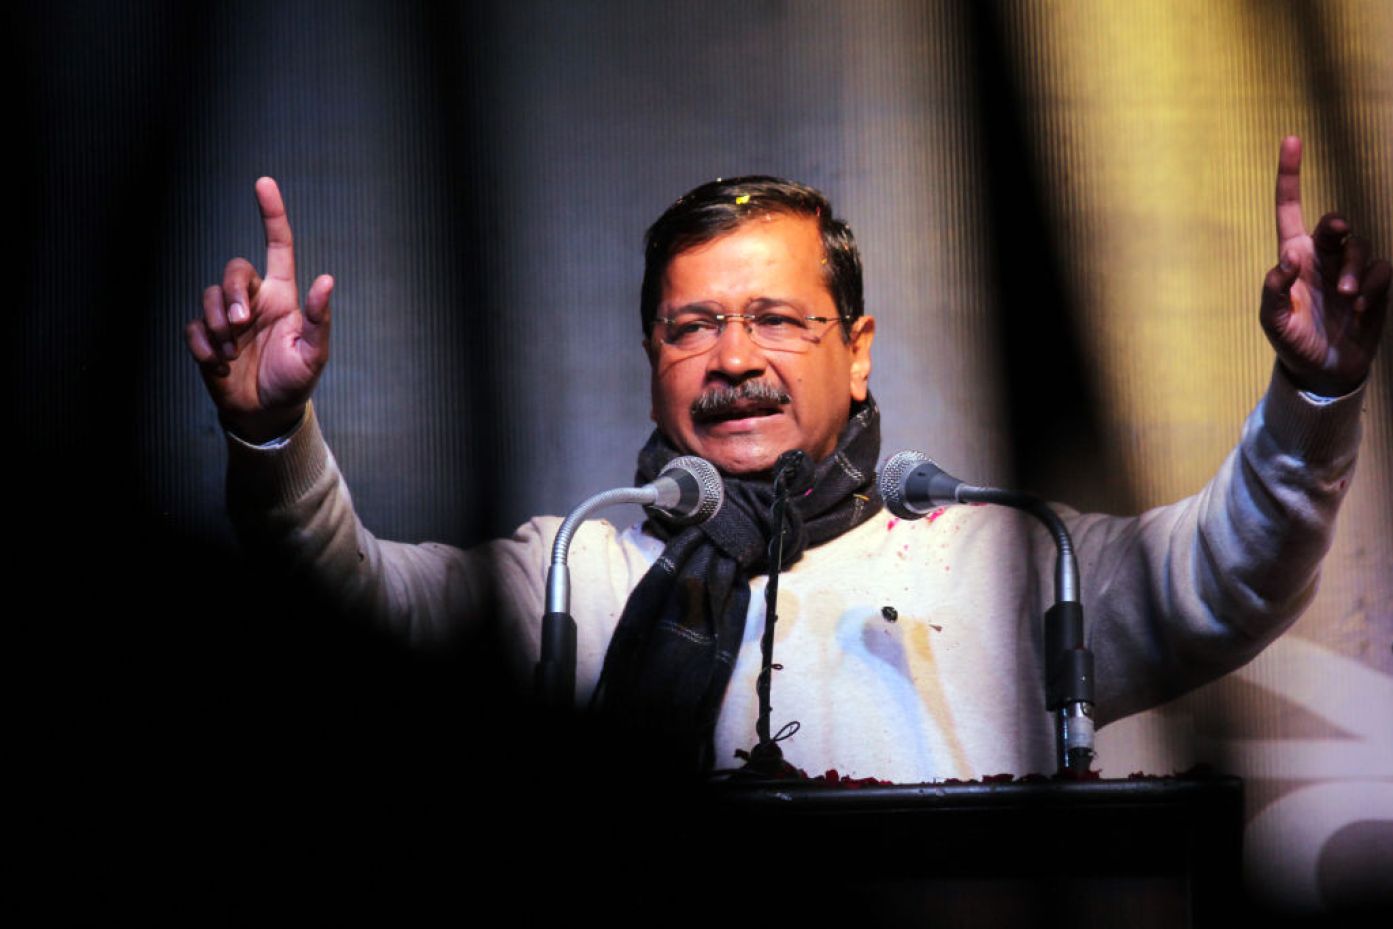 As Indian Elections Near, a Delhi Chief Minister’s Arrest Raises Concern